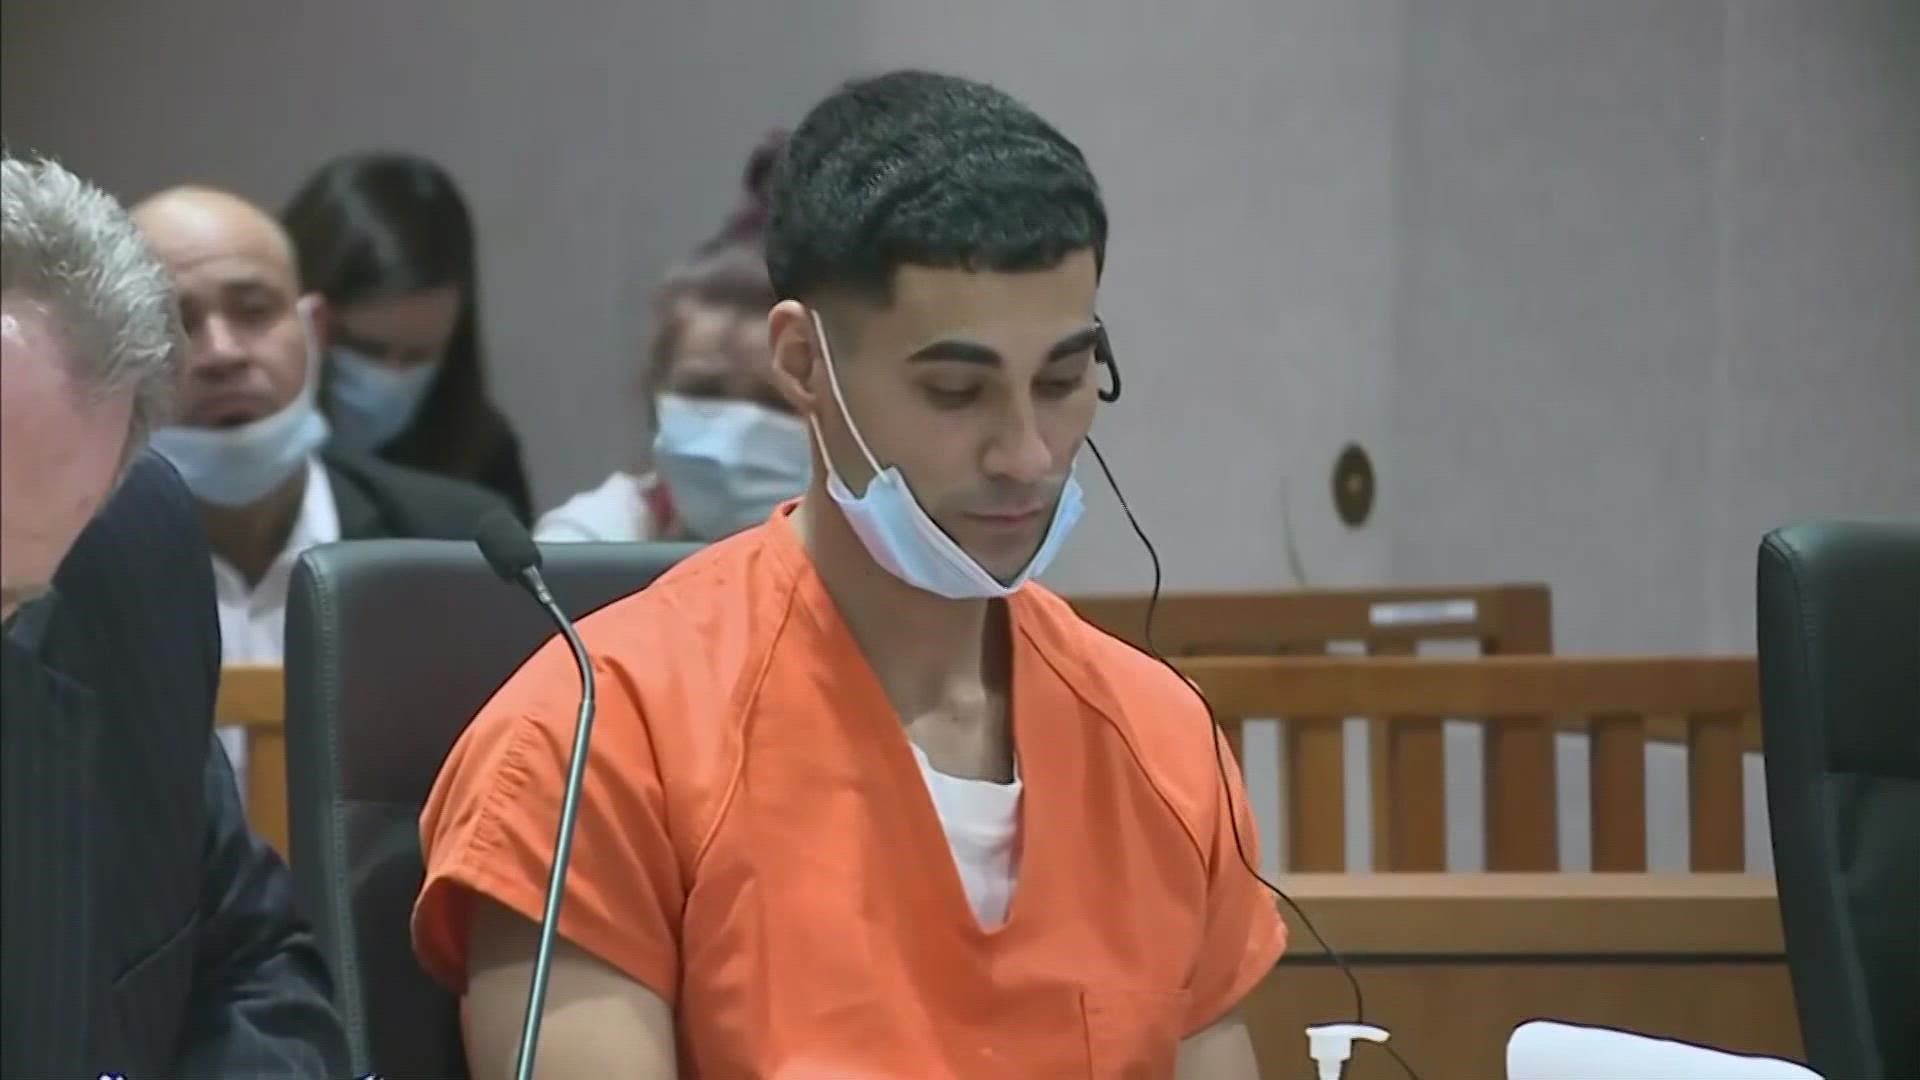 Rogel Aguilera-Mederos was sentenced to 110 years in prison for a fiery wreck that killed four people. It's a case getting national attention.